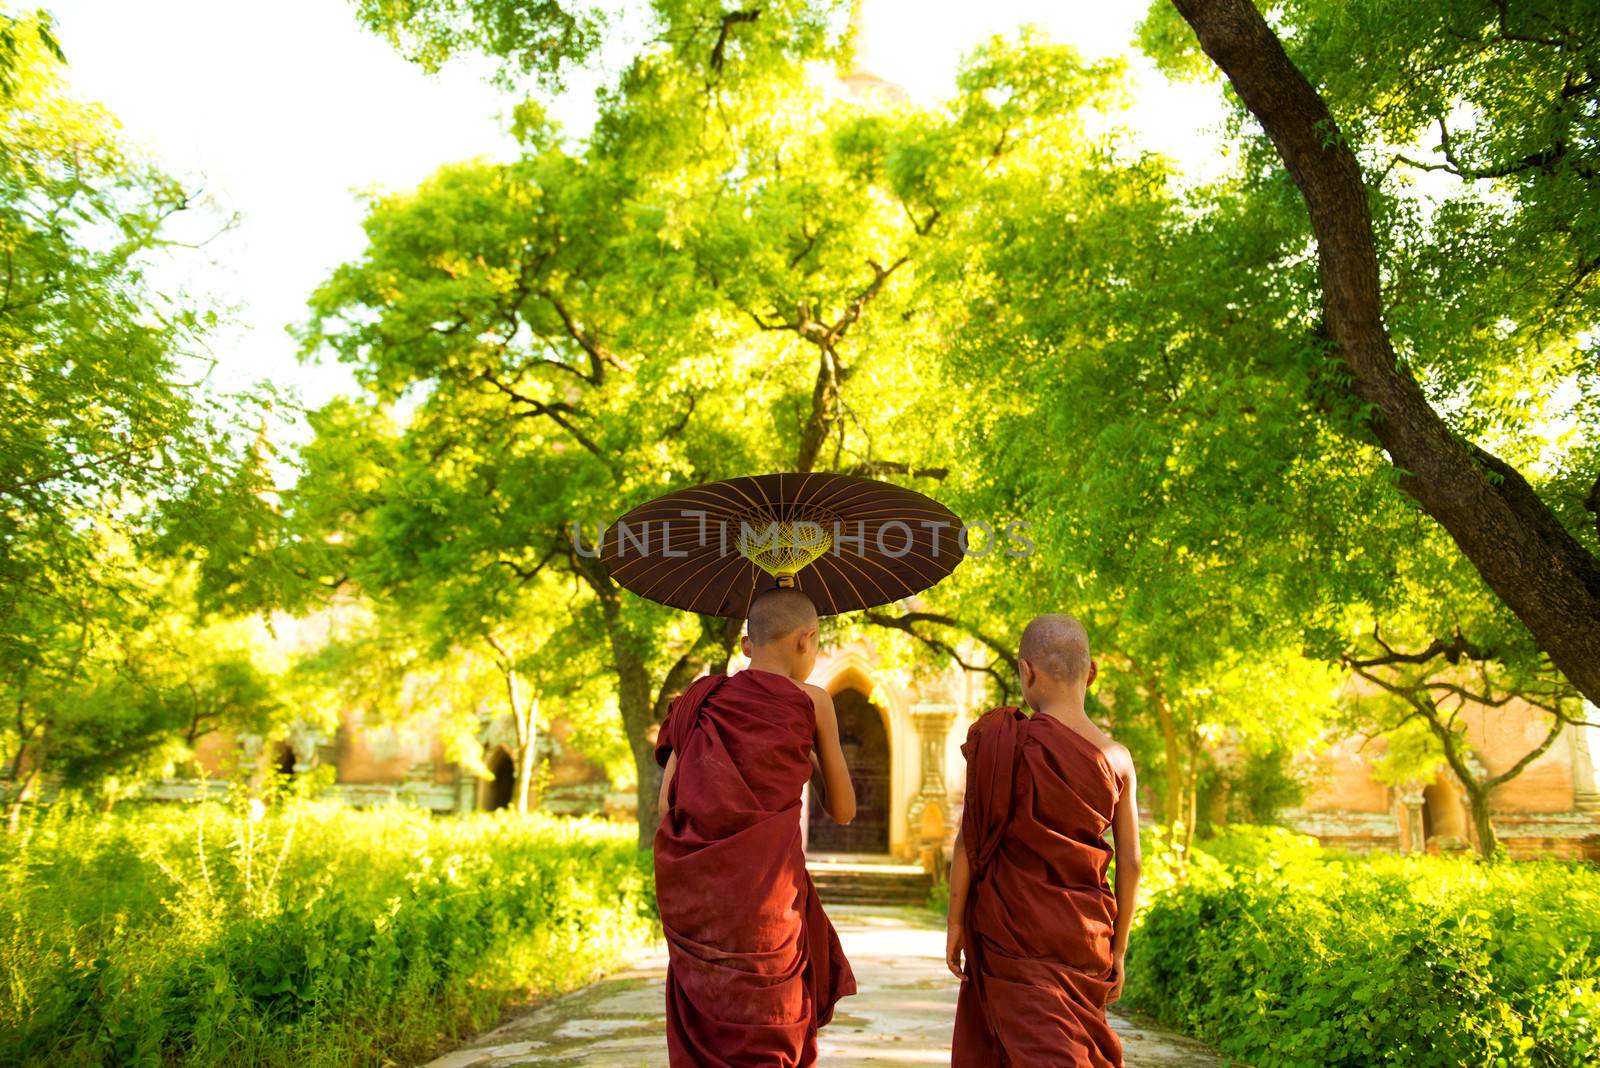 Two little Buddhist monks walking outdoors under shade of green tree, rear view, outside monastery, Myanmar.